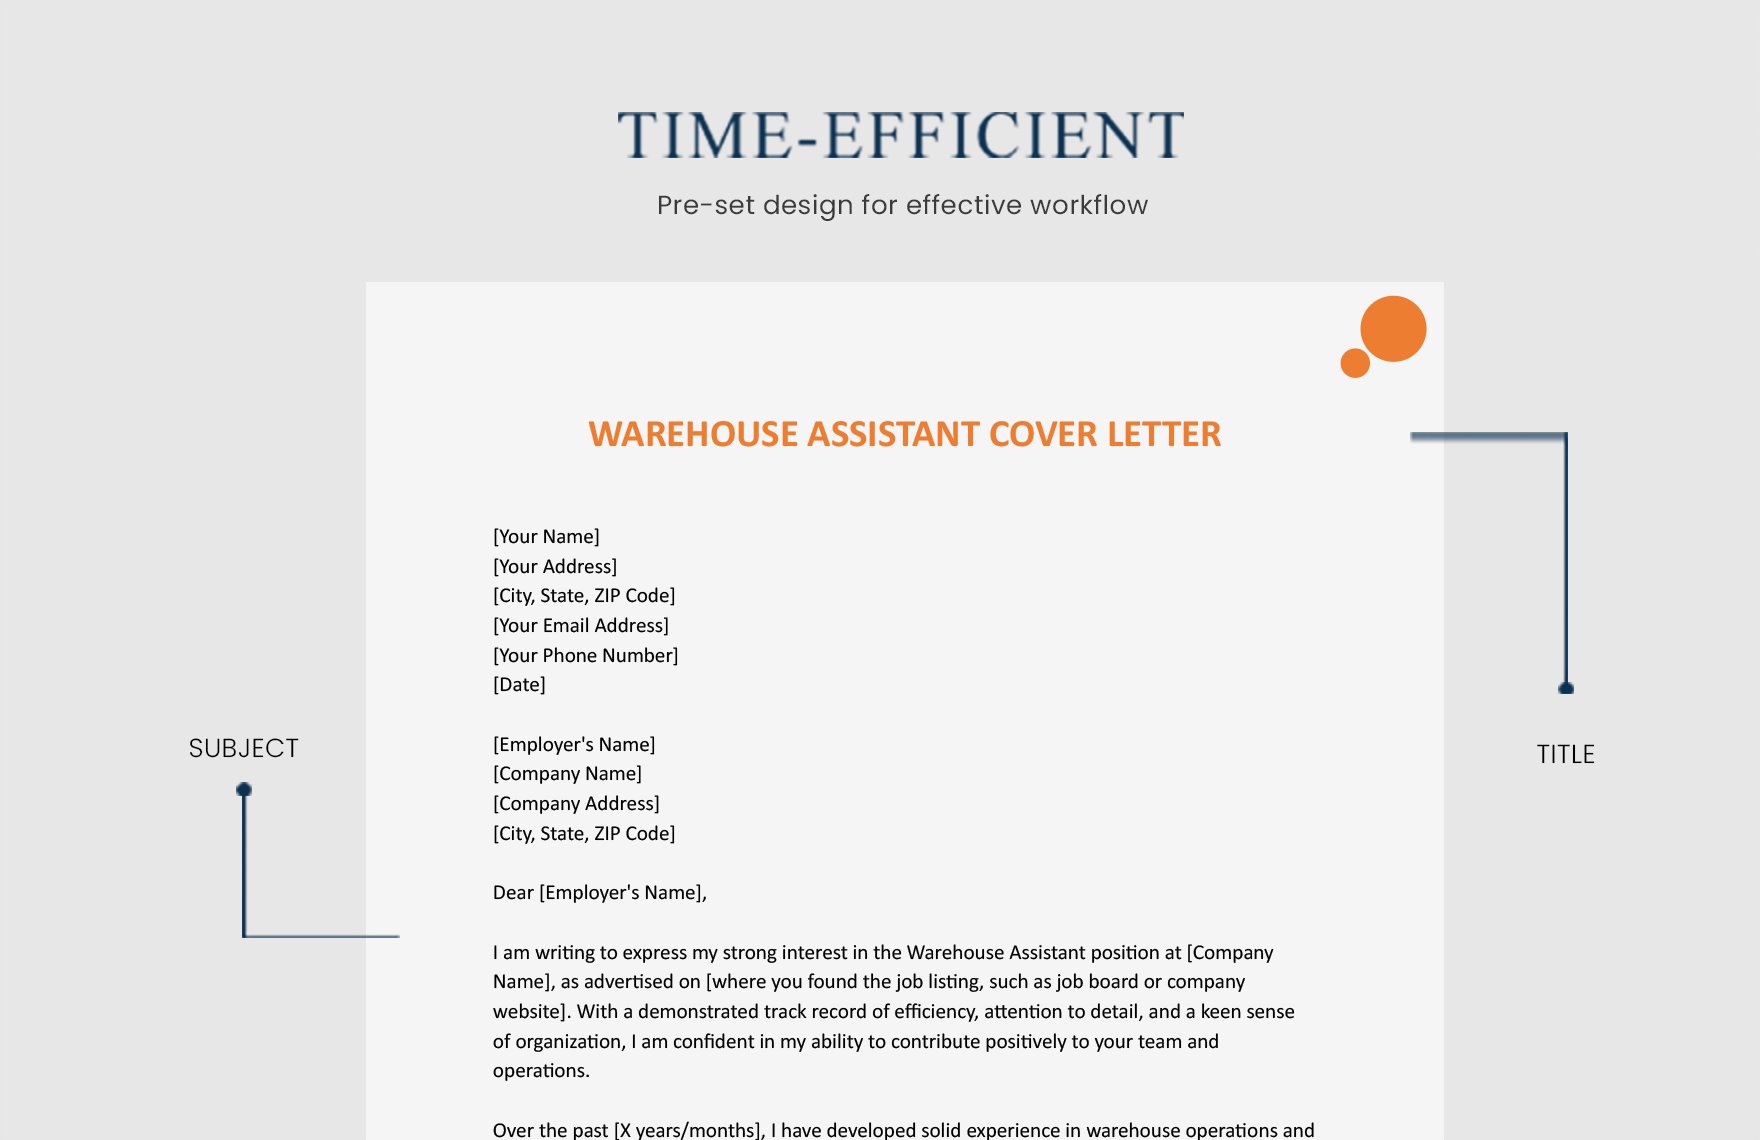 Warehouse Assistant Cover Letter